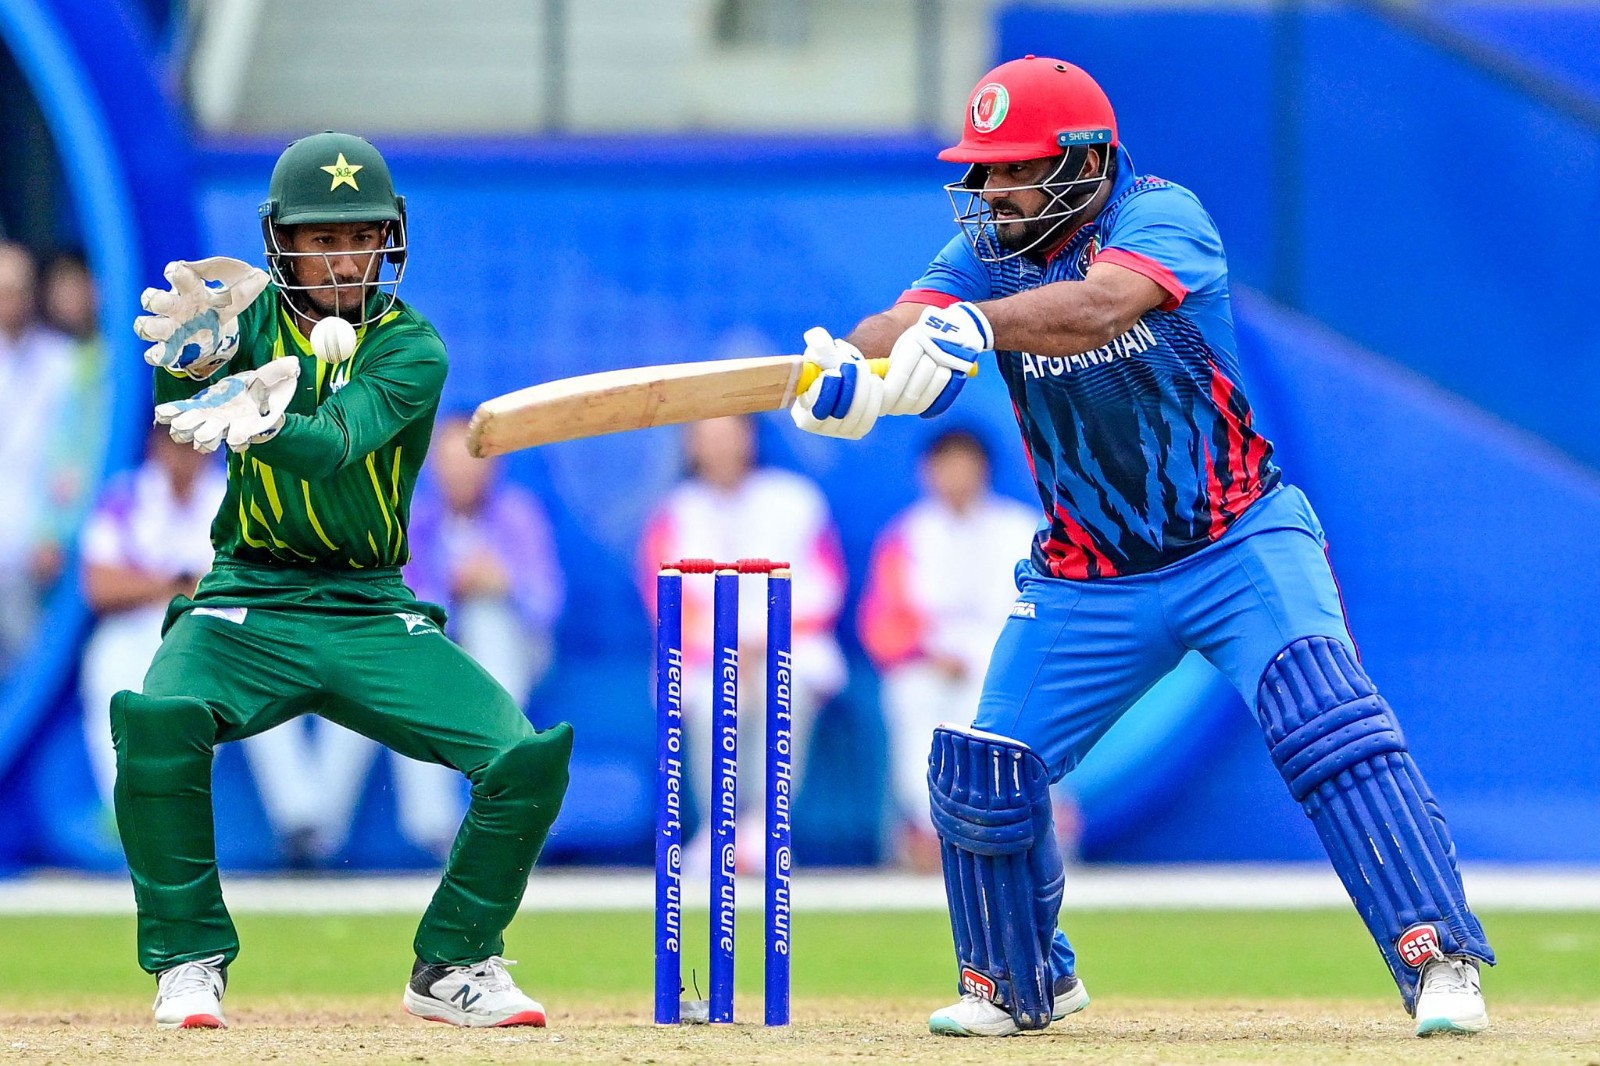 Afghanistan''s Mohammad Shahzad (R) plays a shot during the 2022 Asian Games men's second semifinal cricket match against Pakistan in Hangzhou in China's eastern Zhejiang Province on October 6, 2023. The Afghan national team is an emerging power in men's cricket. /CFP